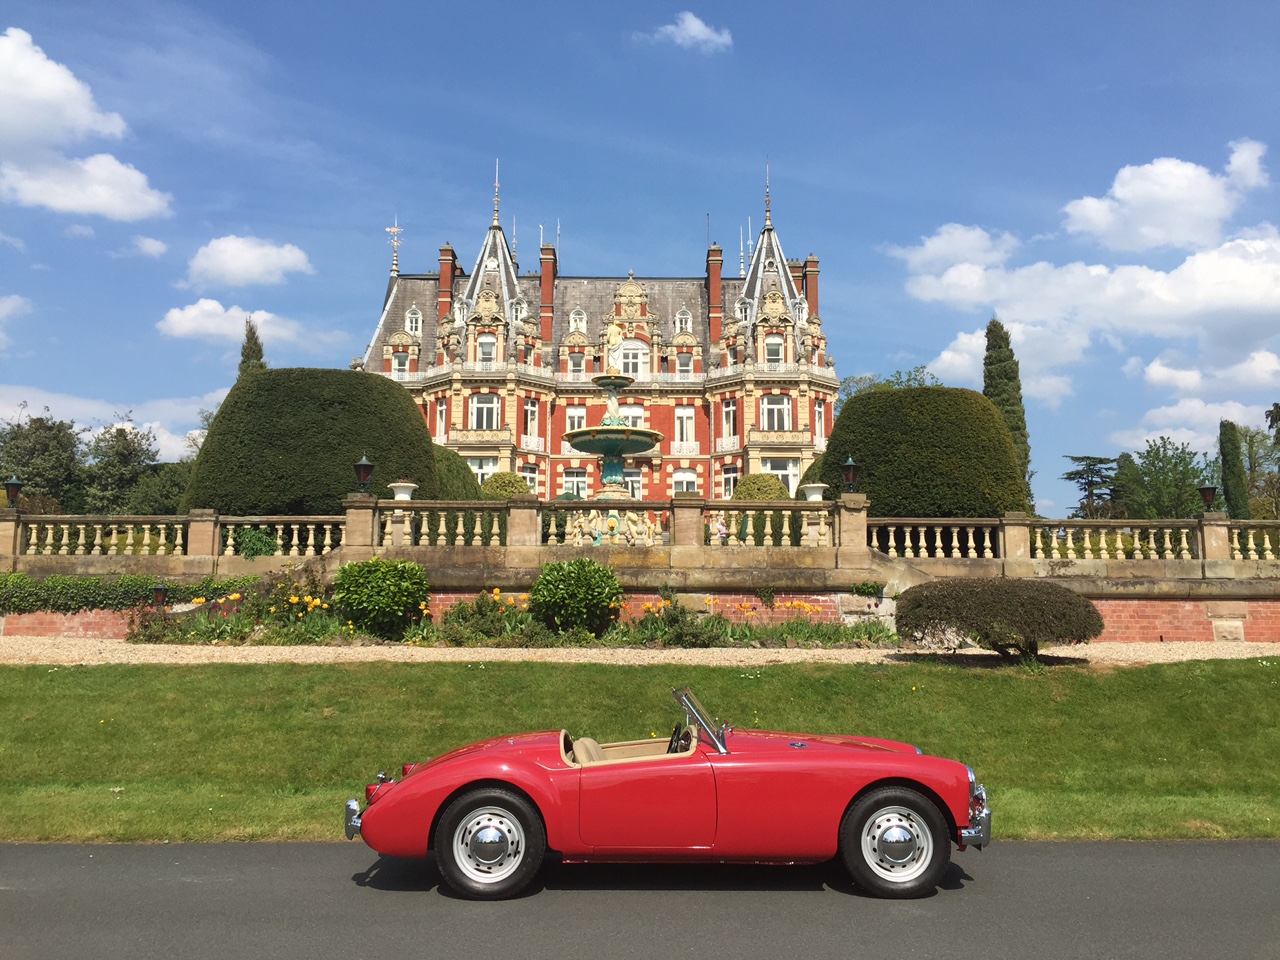 1957 MGA Chateau Impney Droitwich